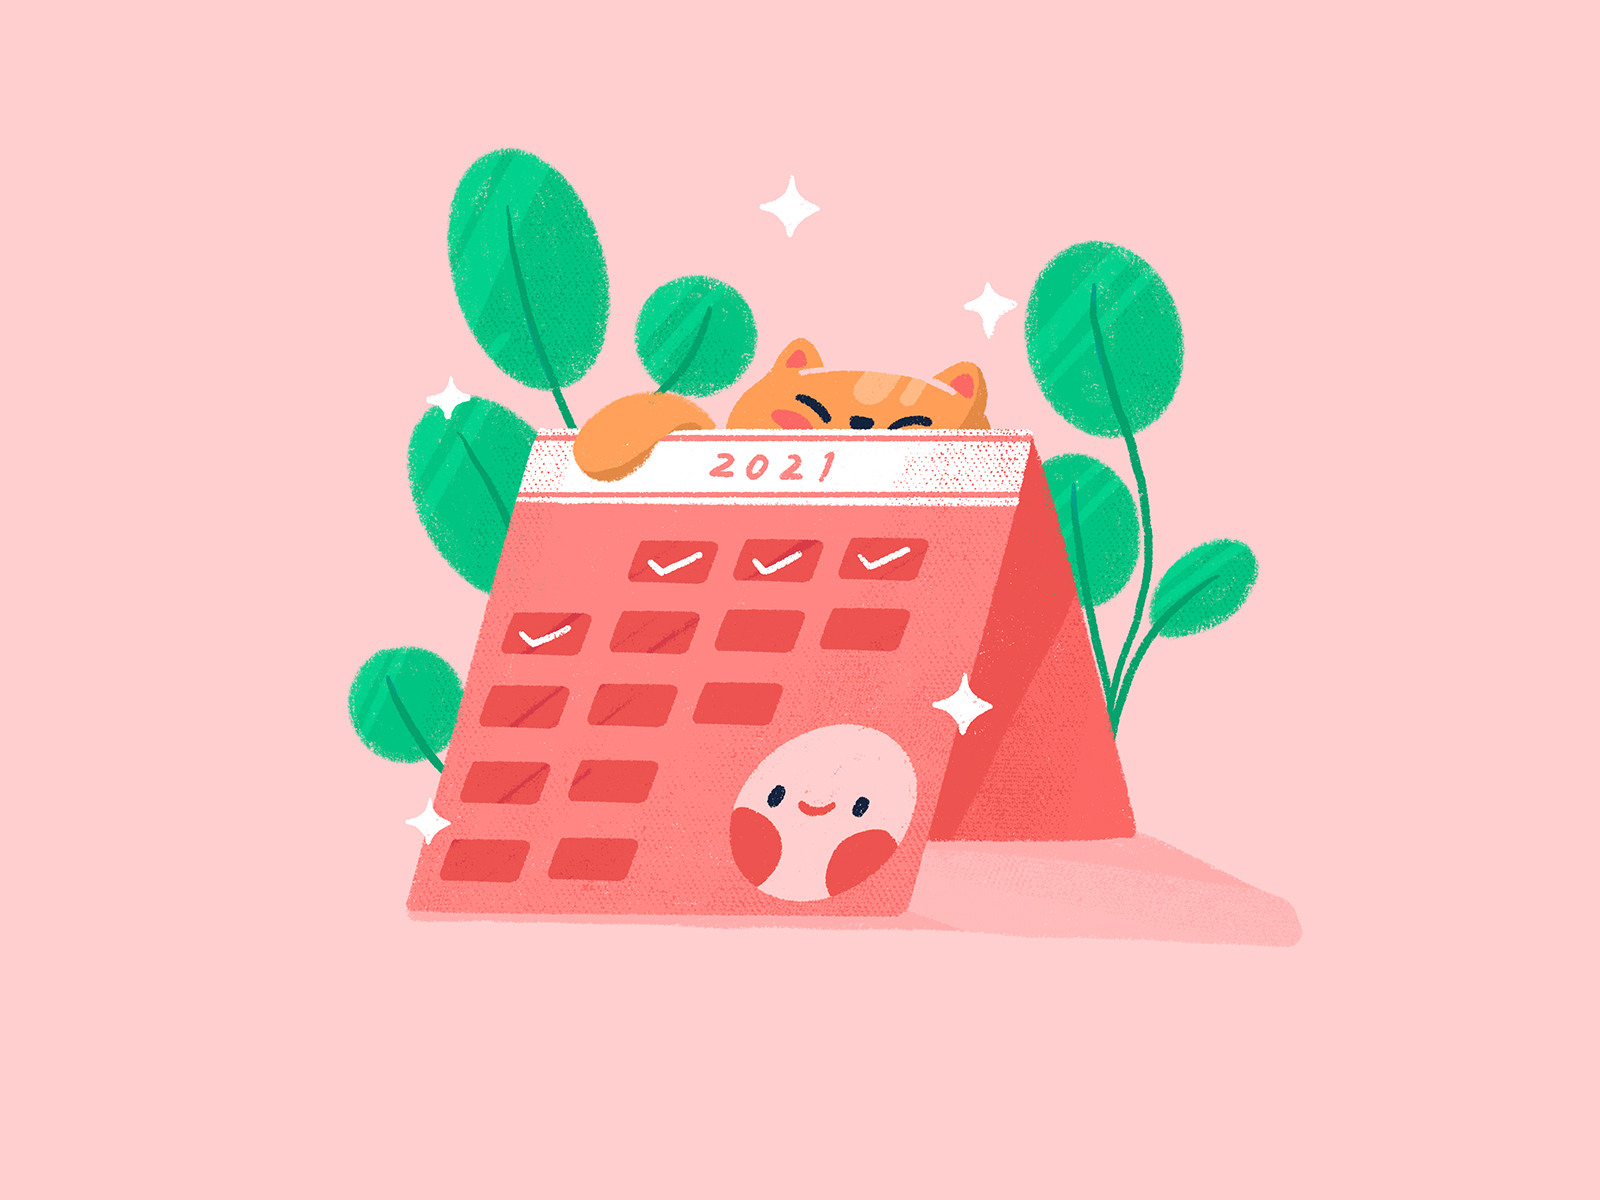 May good things come by Somewan on Dribbble